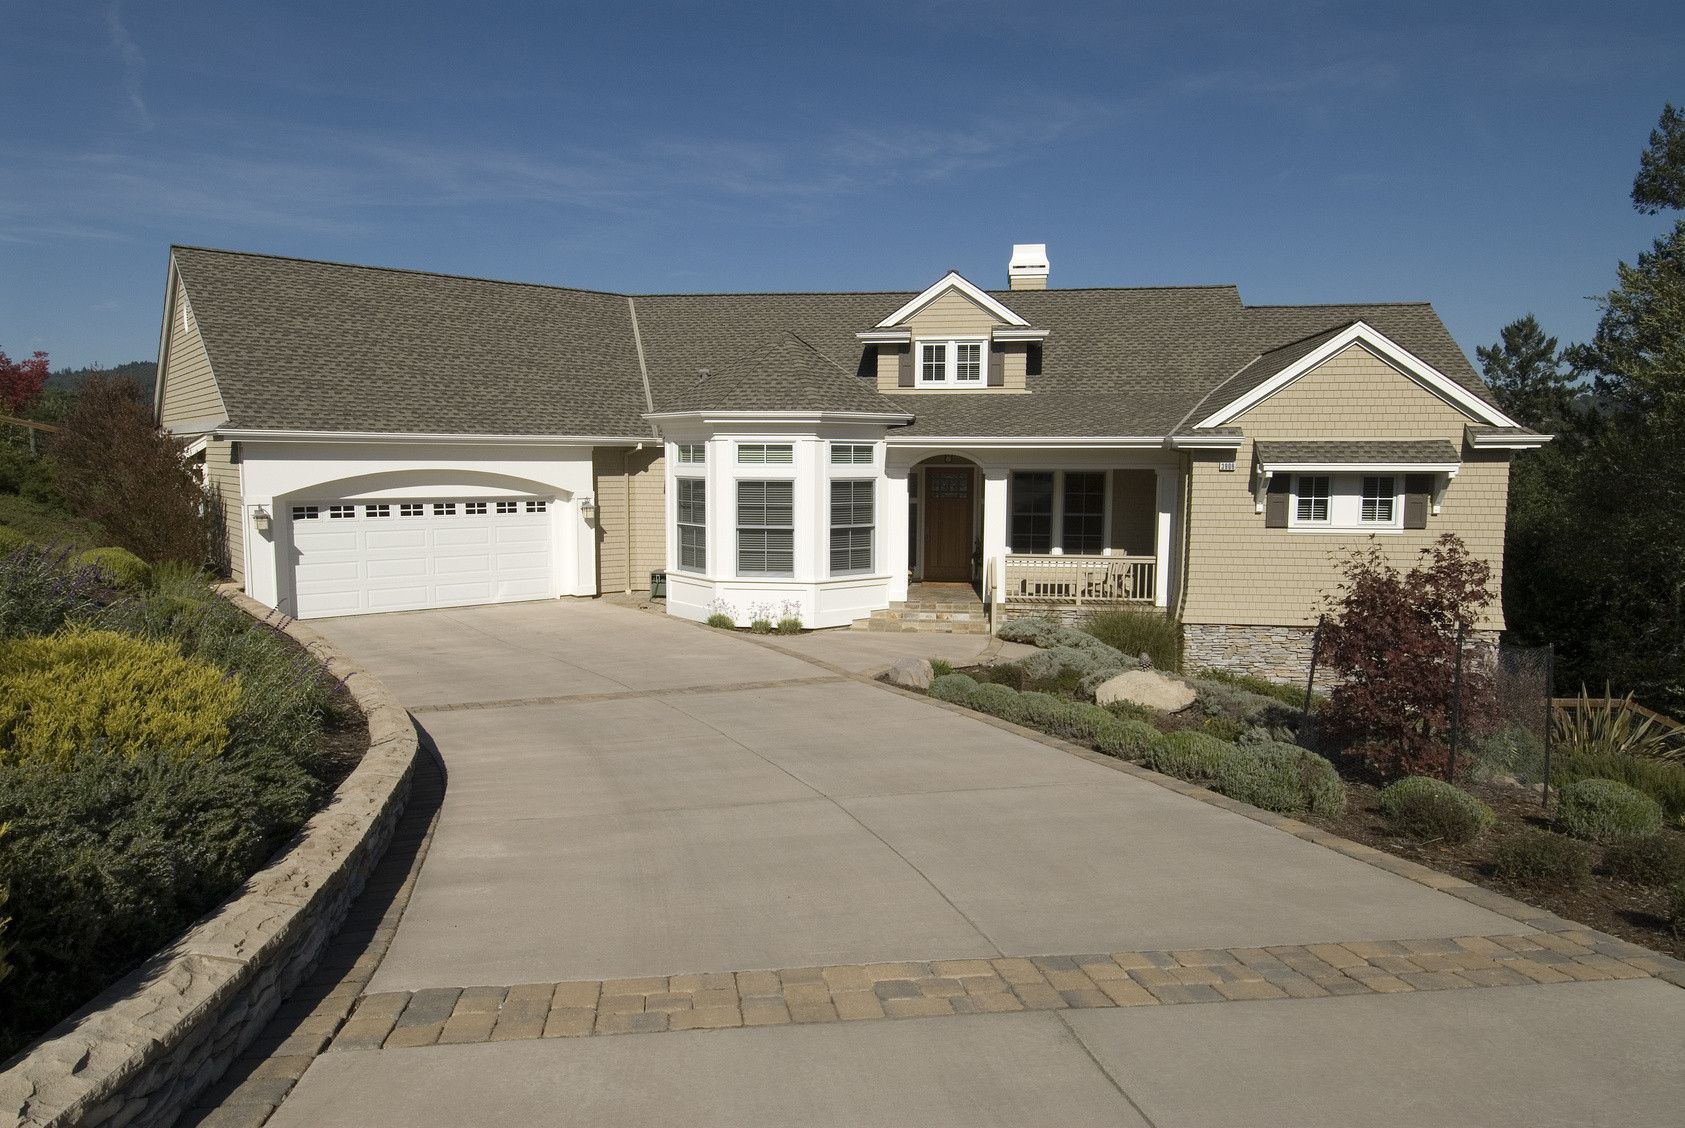 Outdoor Landscape Driveway
 5 Landscaping Ideas for the Driveway